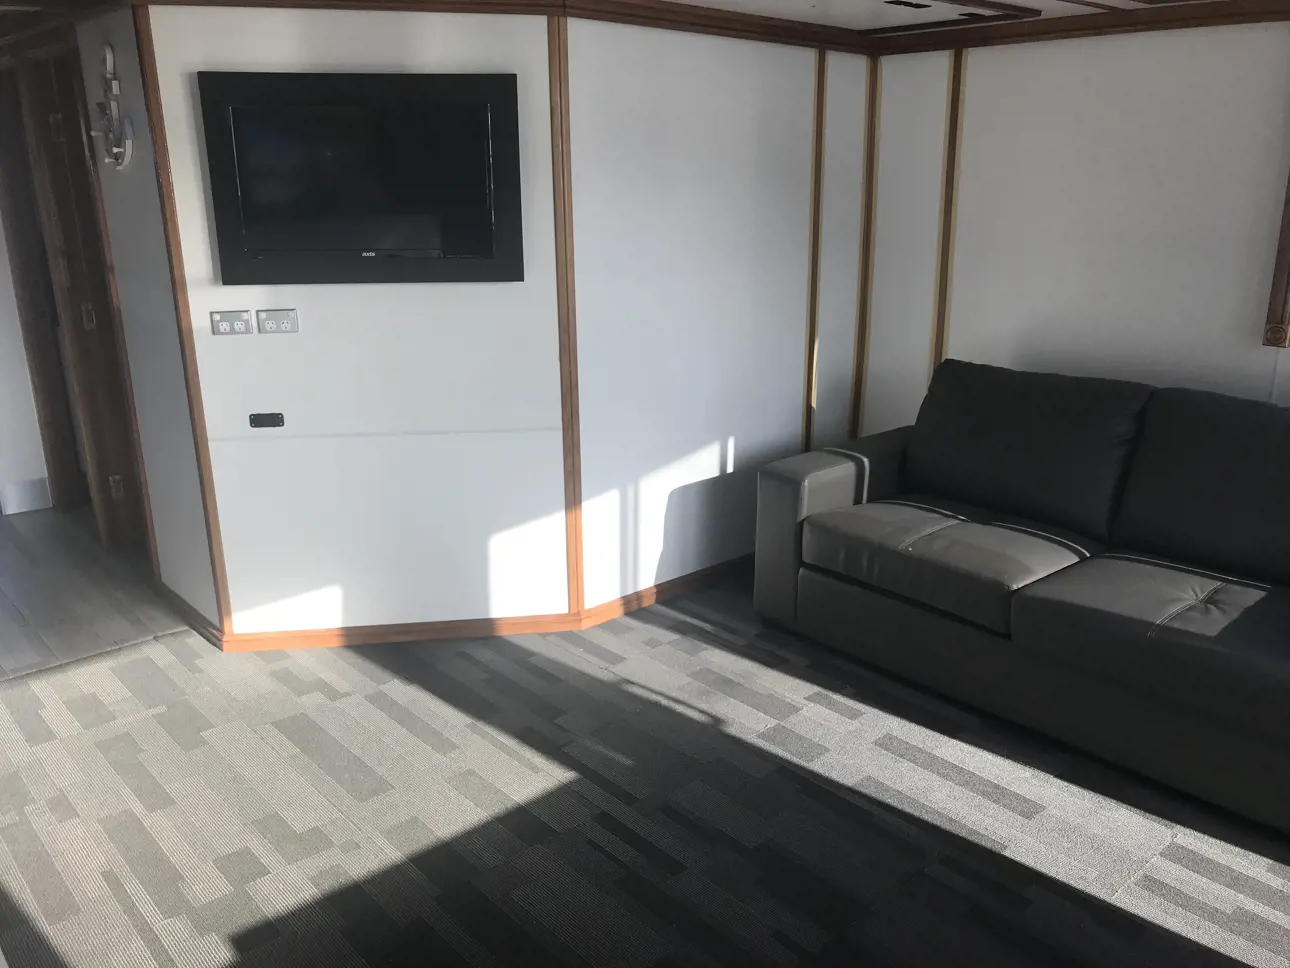 lounge area to rear with TV